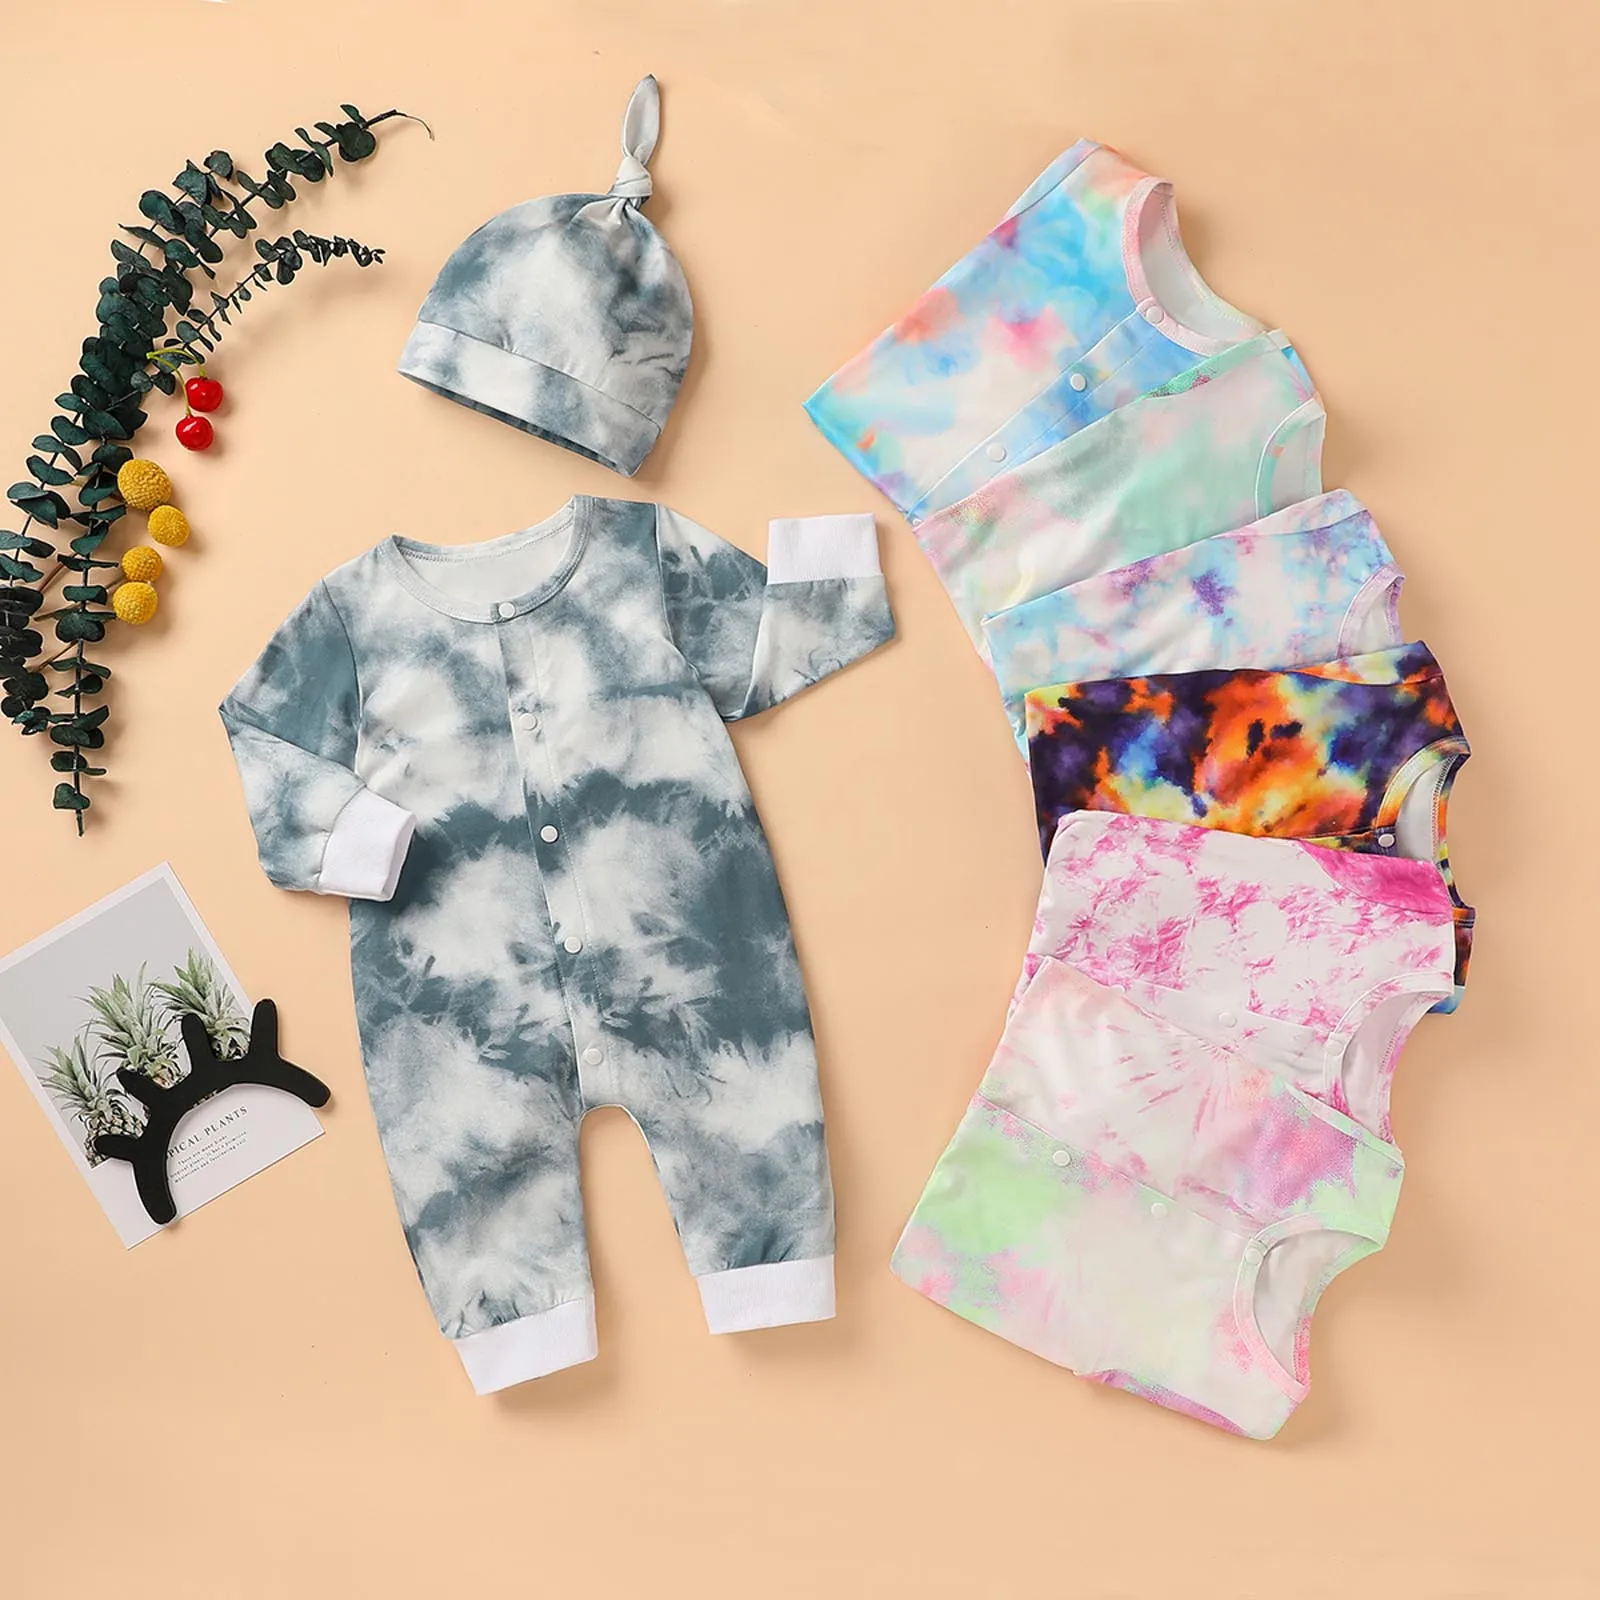 Baby Clothes Baby Clothes Girls Sets Boys Romper Long Sleeve Tie-dyed Jumpsuits Clothes Overalls With Hat детская одежда 2